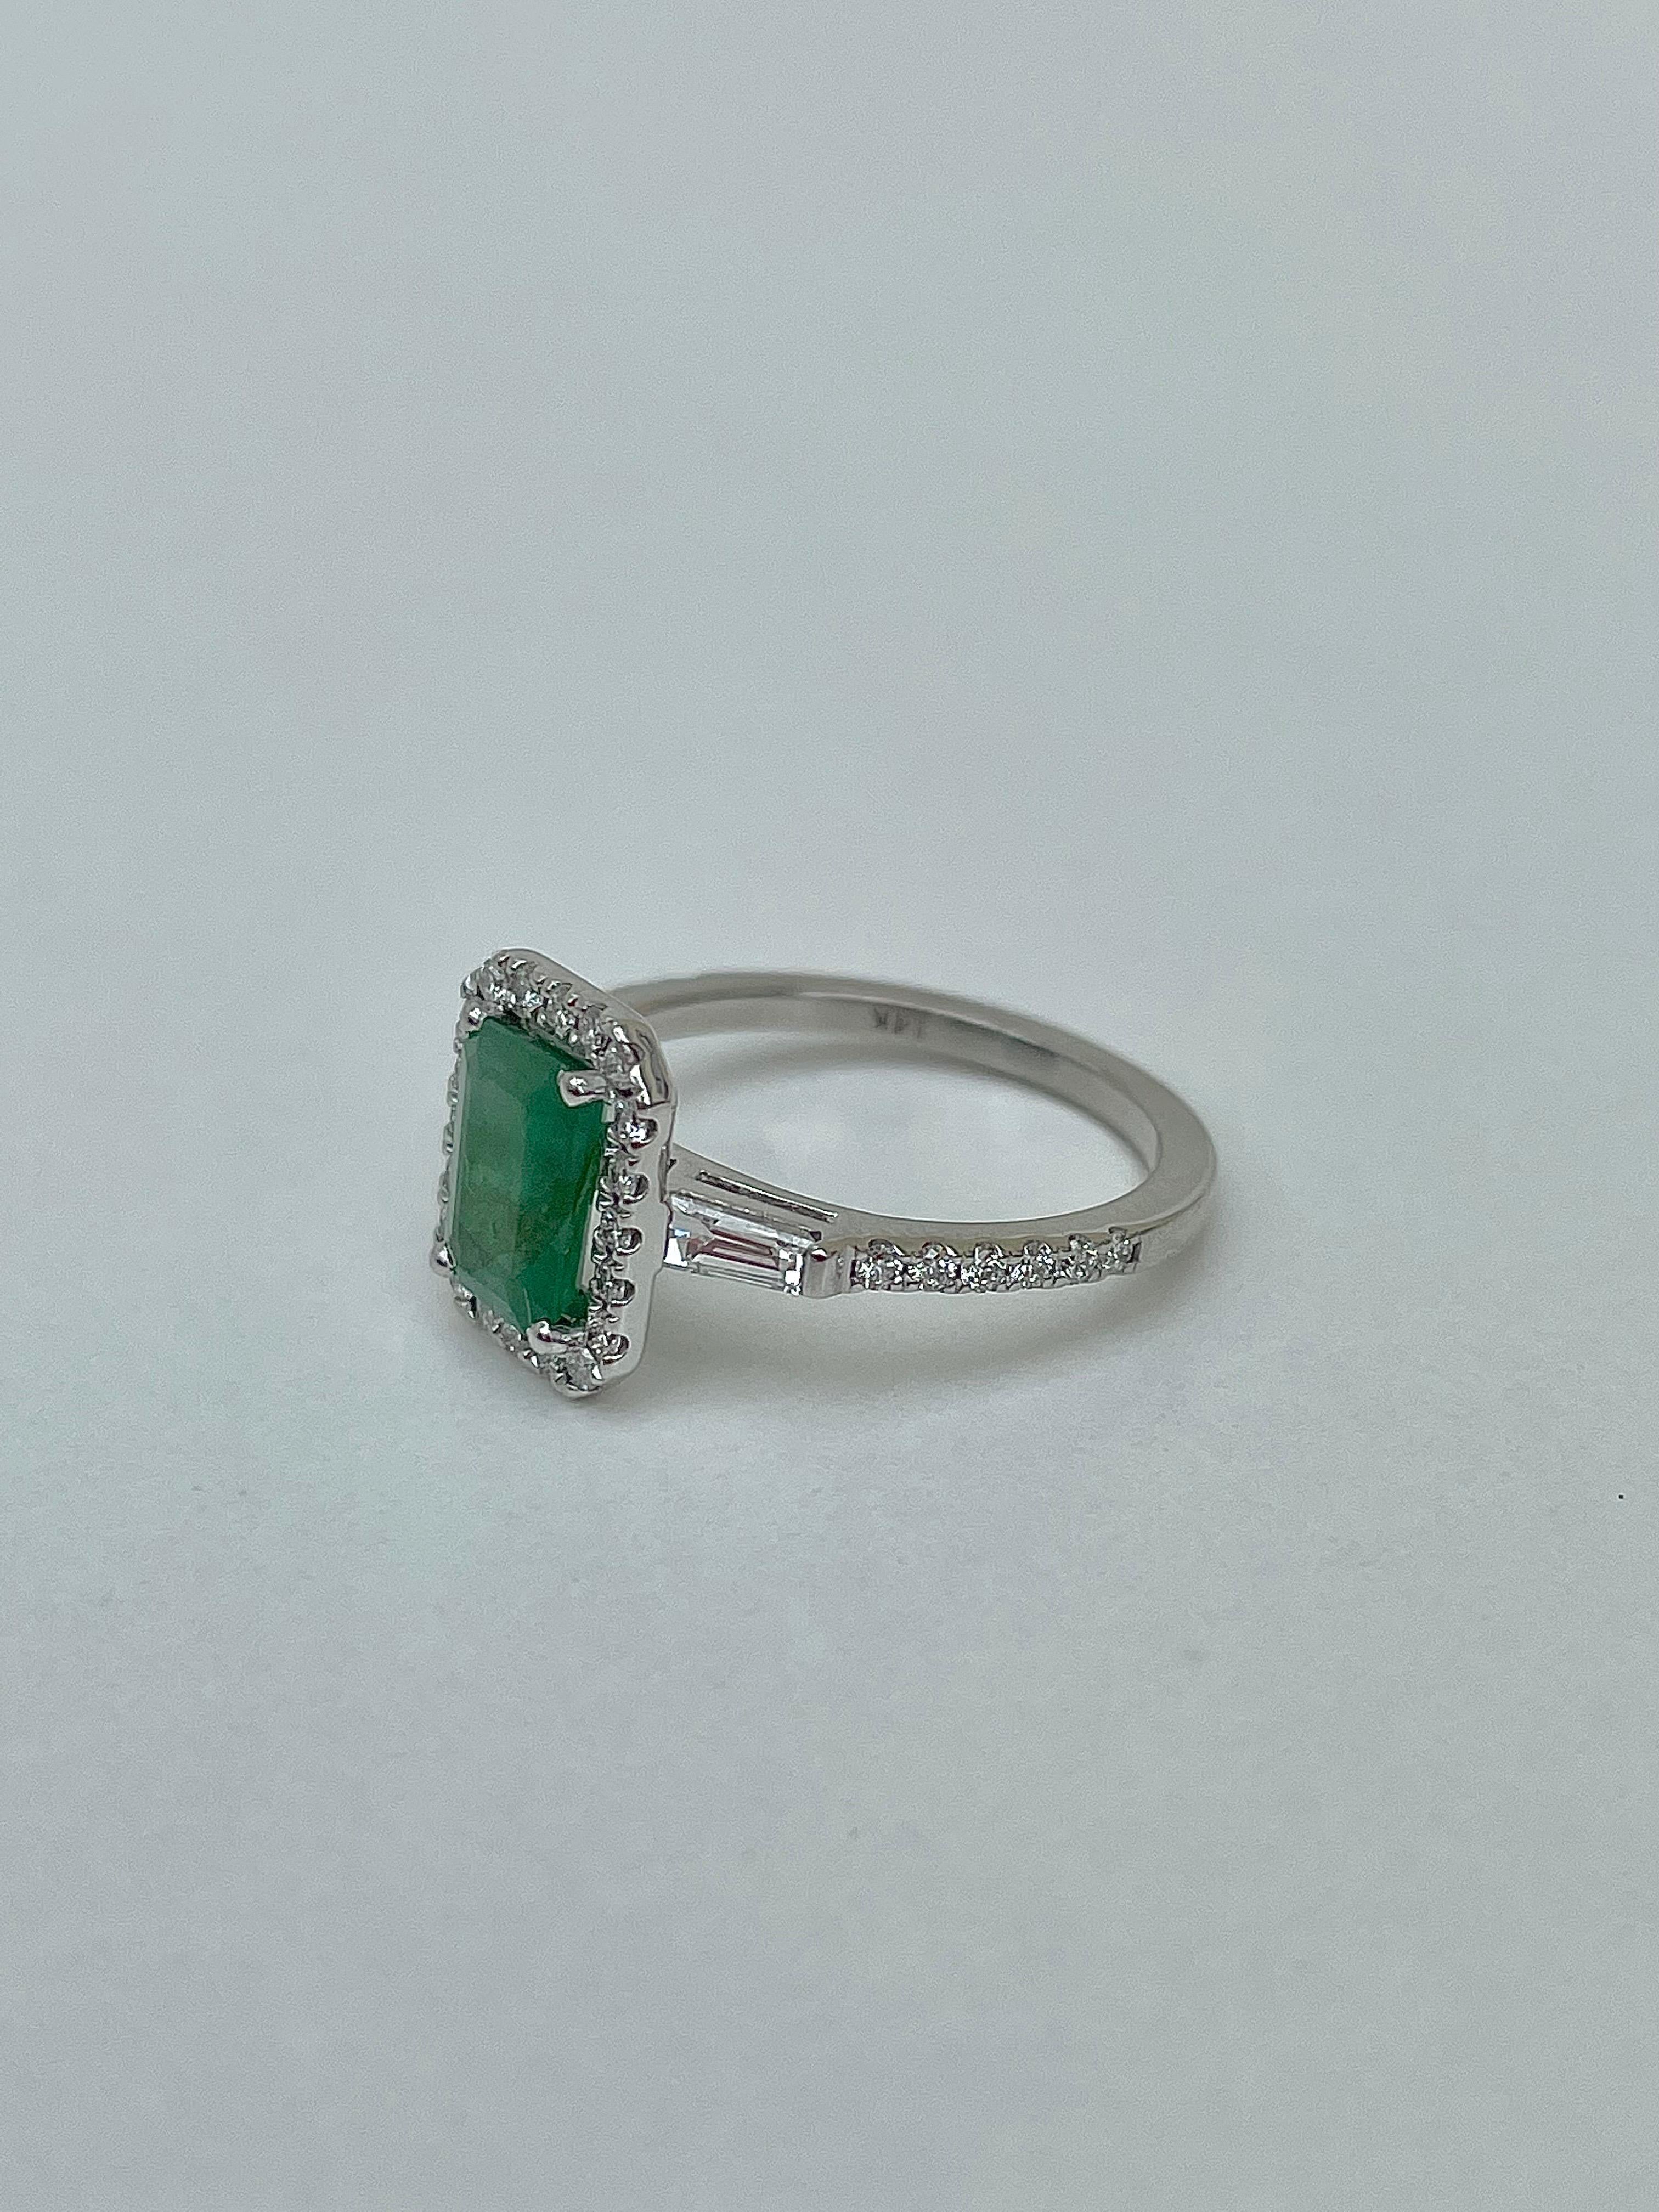 Delightful Emerald and Diamond halo ring with lovely baguette cut diamond shoulders set entirely in  14K White Gold.



darling emerald and diamond halo ring, she sparkles in the sunlight!



The item comes without the box in the photos but will be